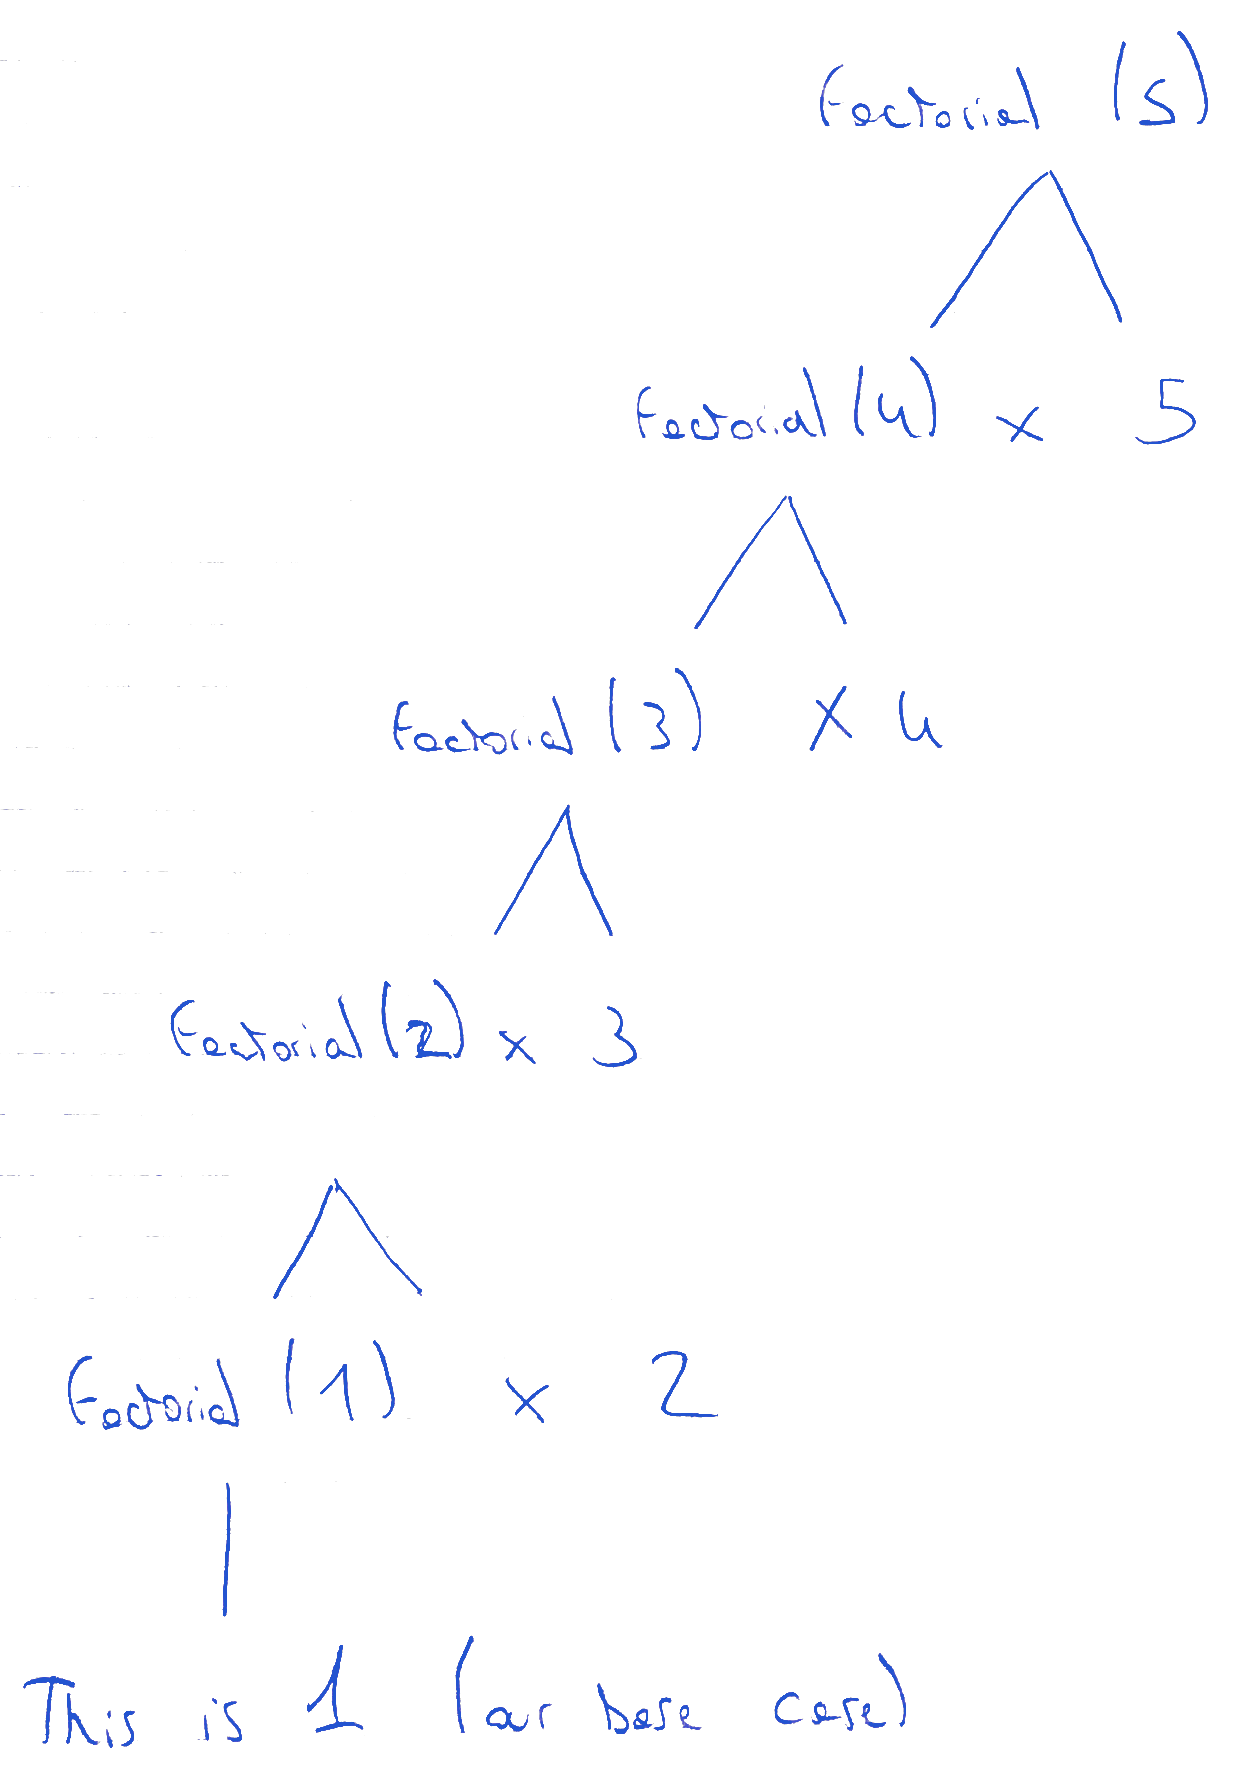 Each call to the factorial function gets expanded into a new call to itself